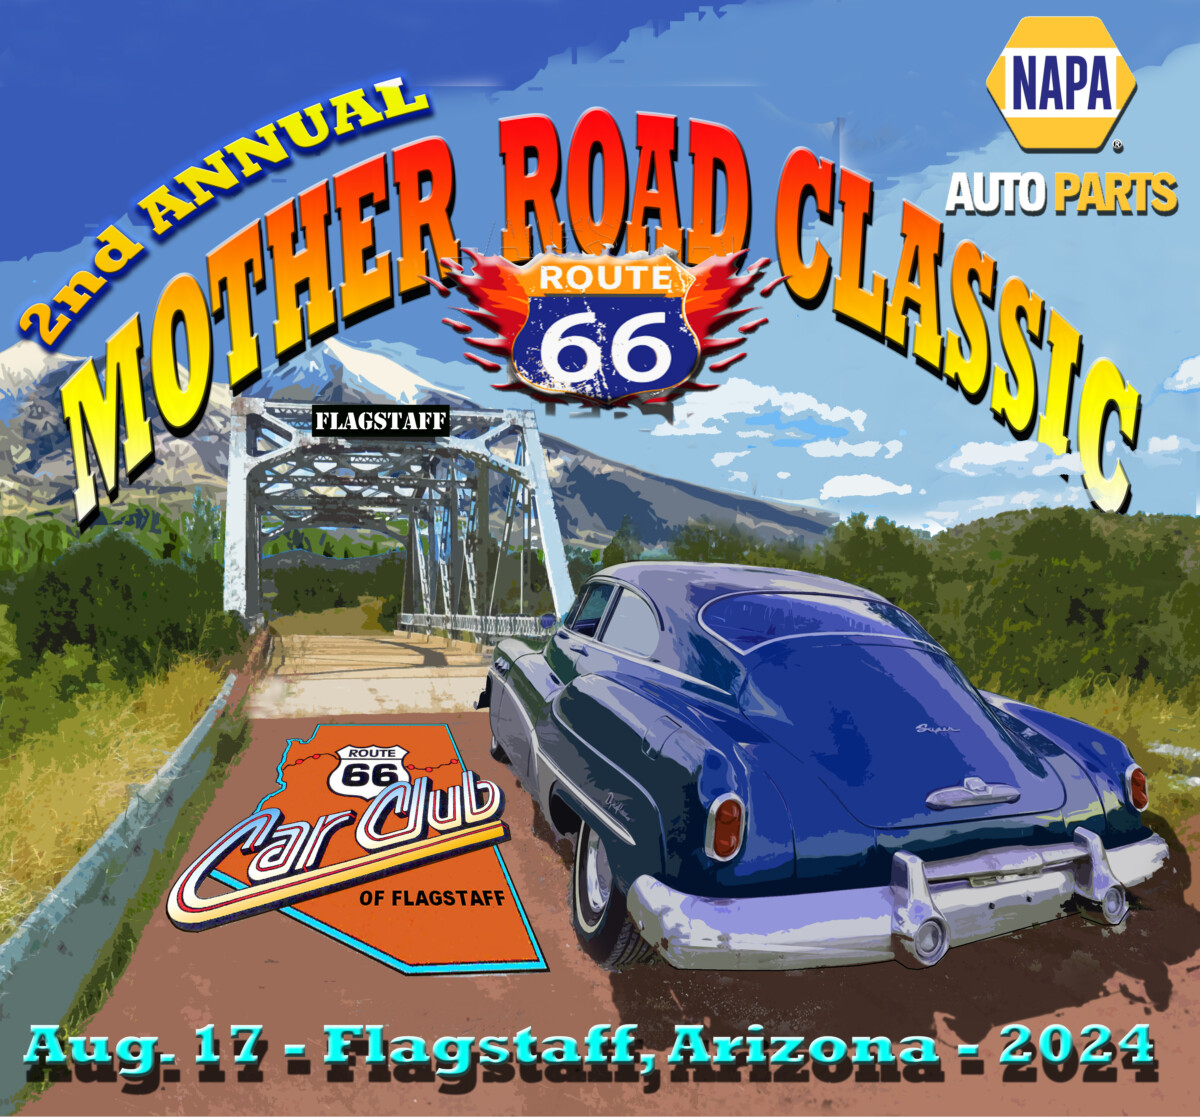 Mother Road Classic Logo Poster